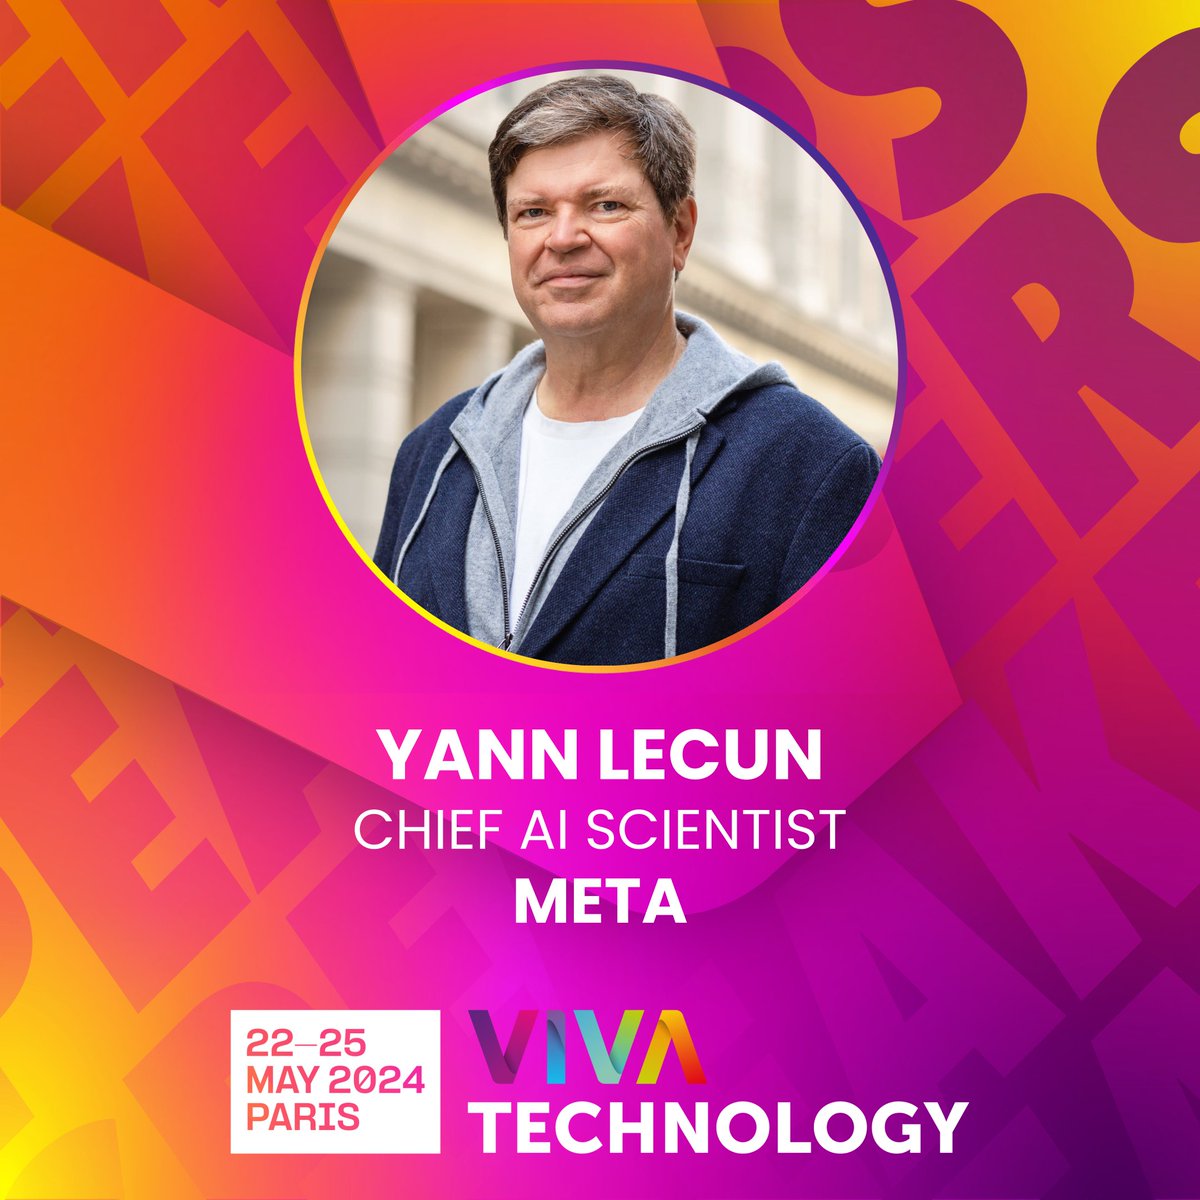 🚀 Proud to announce that @YLeCun, Chief AI Scientist @Meta, will be back at #VivaTech 2024! As a Turing Award winner & pioneer in AI, he will be leading a session on 'Open Science.' Groundbreaking insights into the world of AI & deep neural networks are coming to you soon 🔥